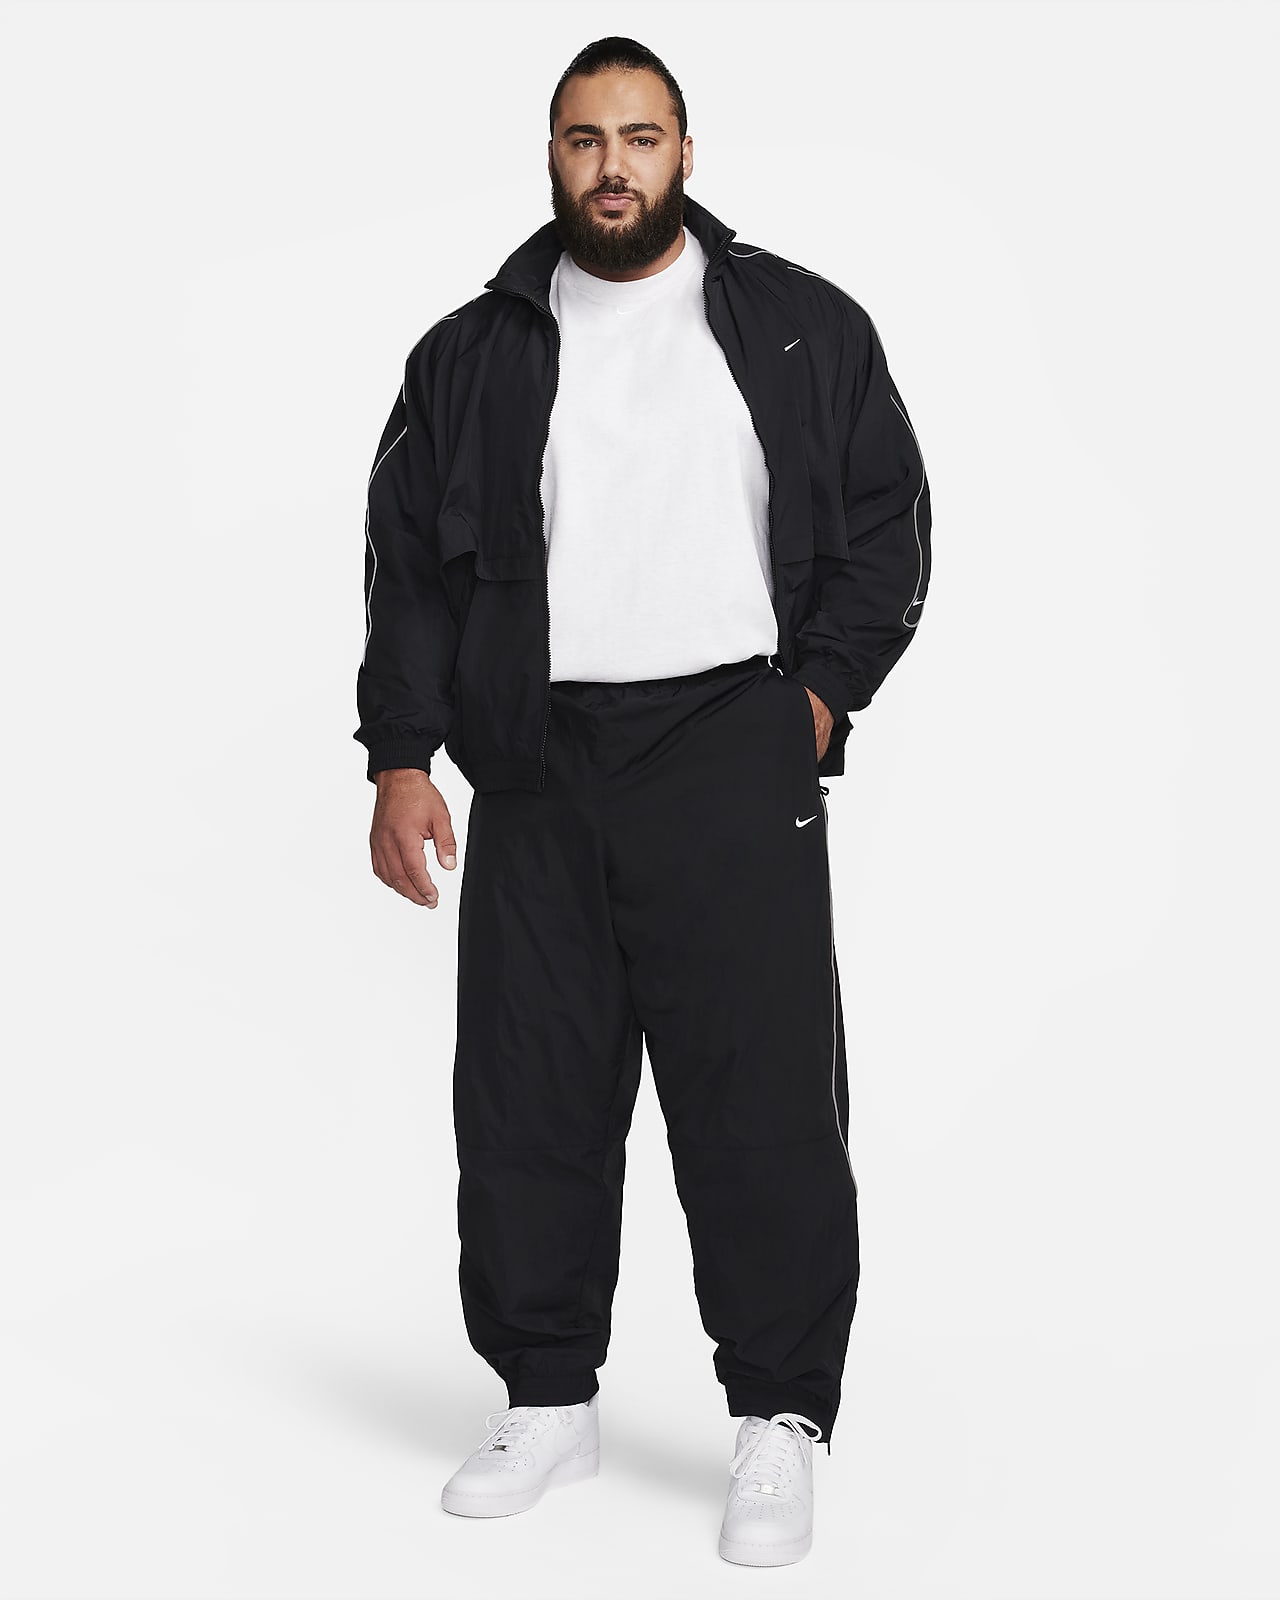 Nike Men's 2-Piece Jogger Set Solo Swoosh Jogger Pants and Hoodie